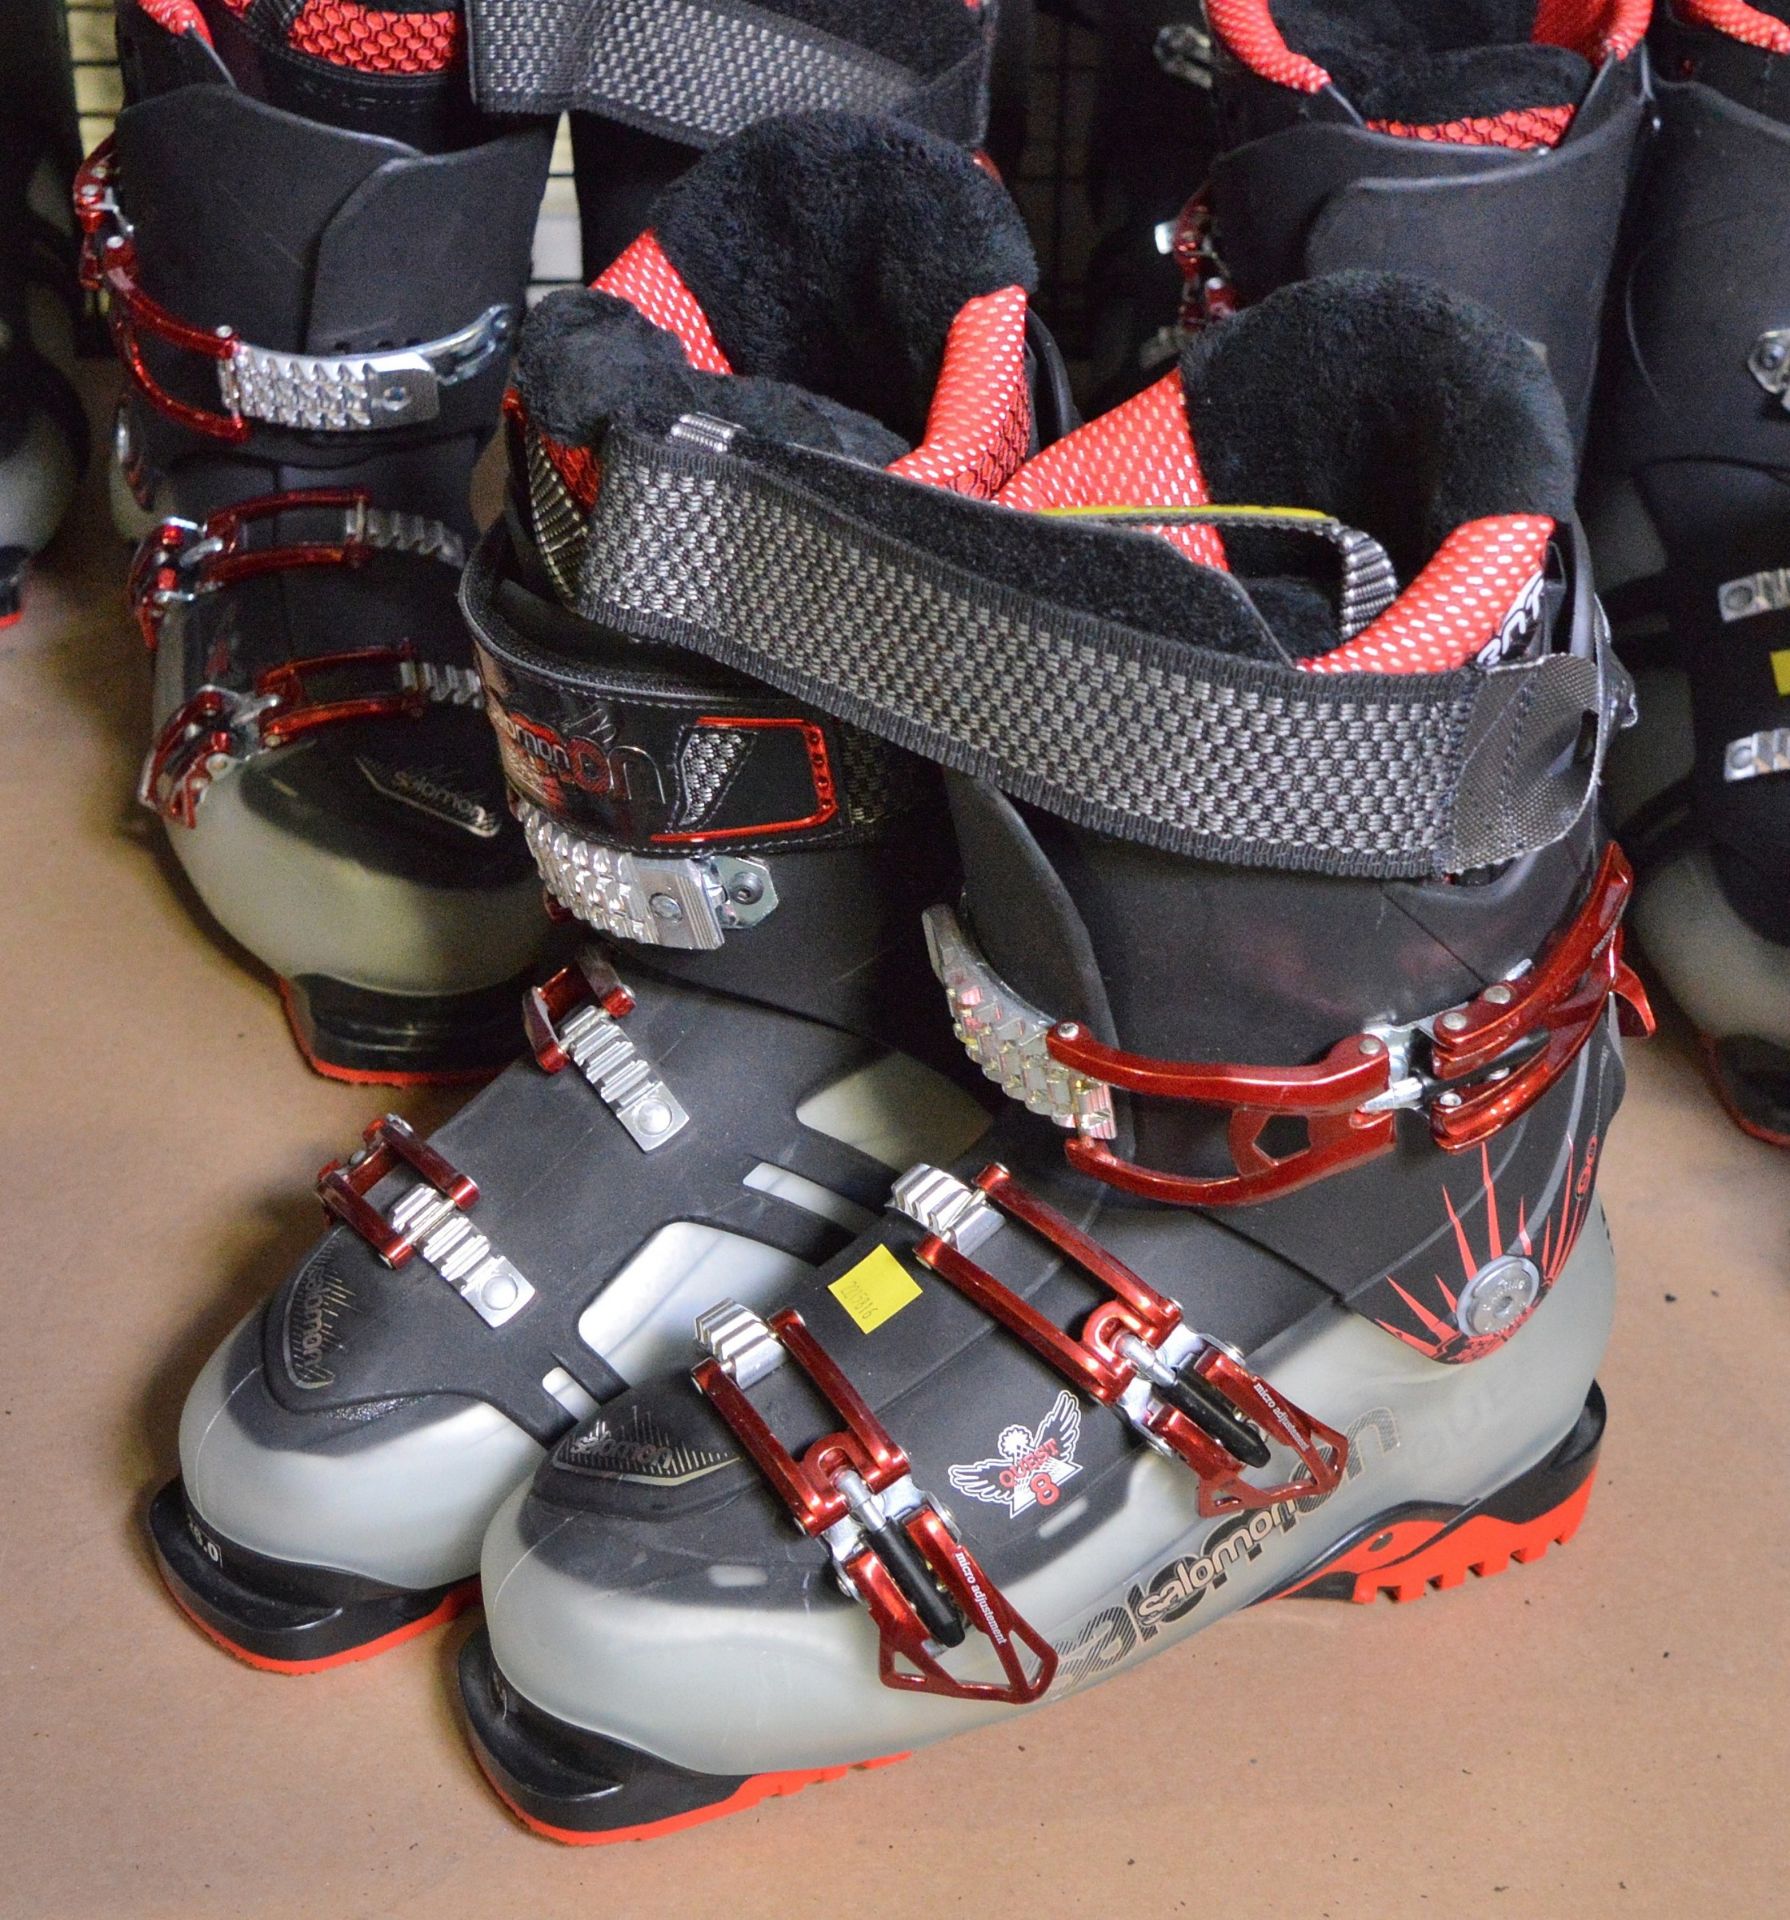 8x Pairs of Ski Boots - various makes & sizes - Image 3 of 4